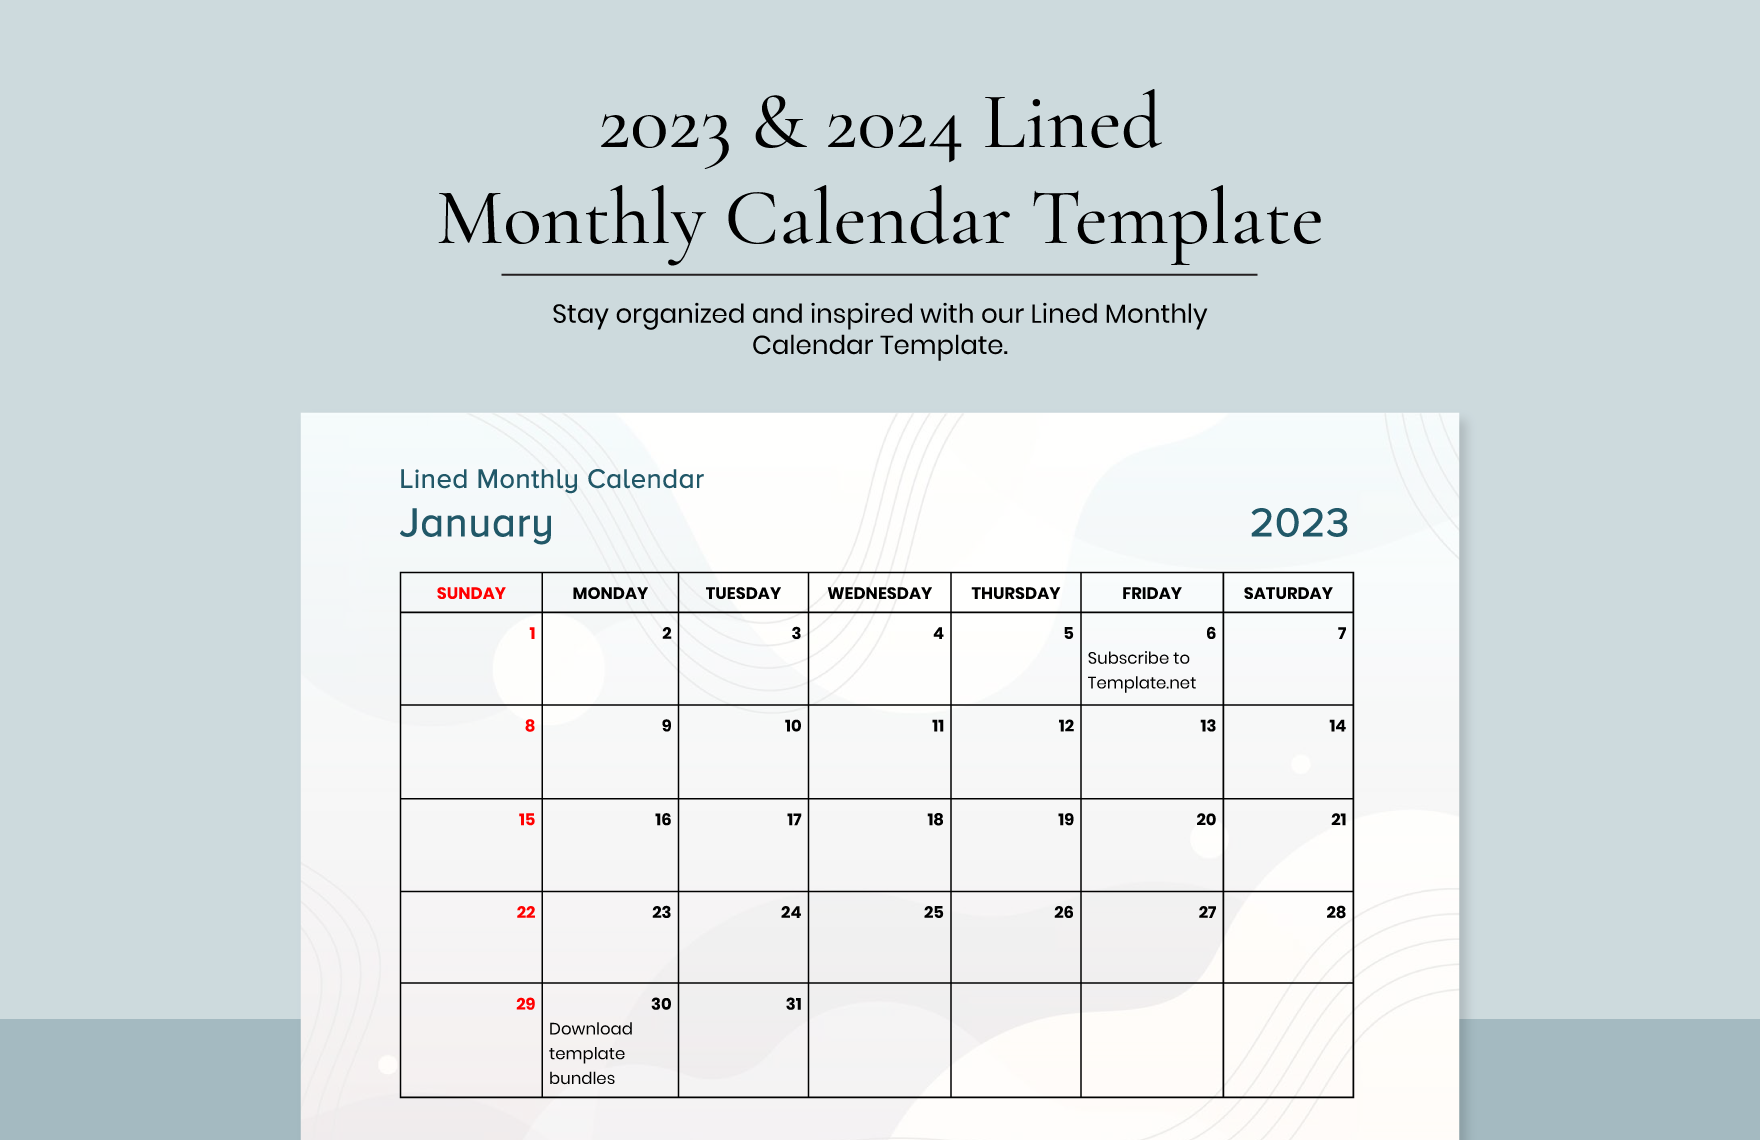 2023 & 2024 Lined Monthly Calendar Template in Word, Google Docs